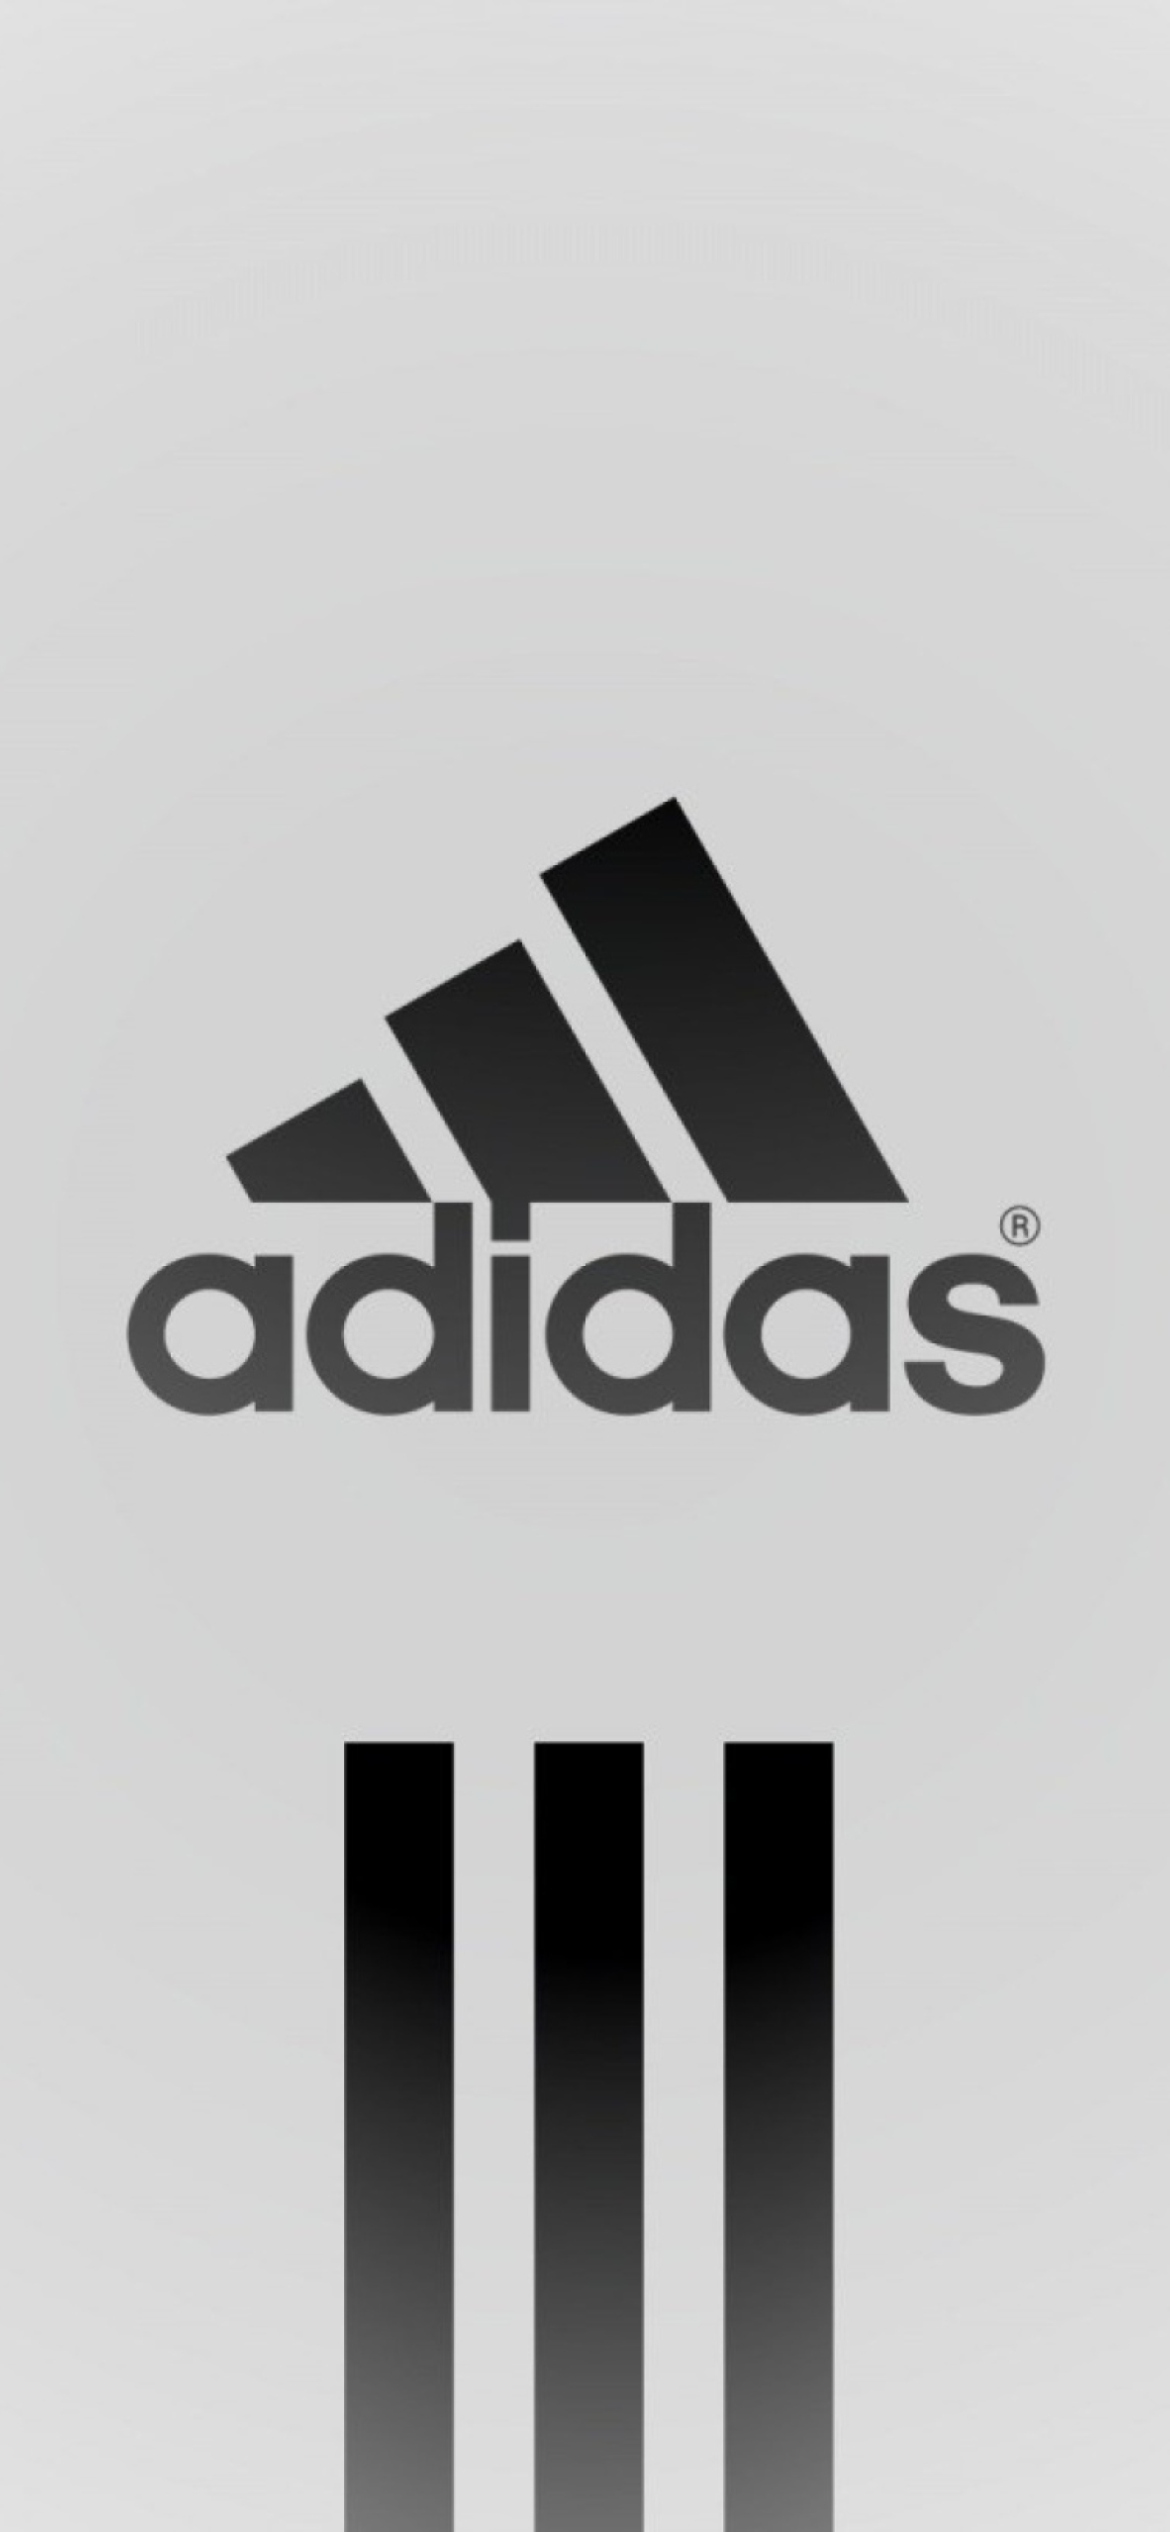 Adidas Logo Wallpaper For Iphone Xr